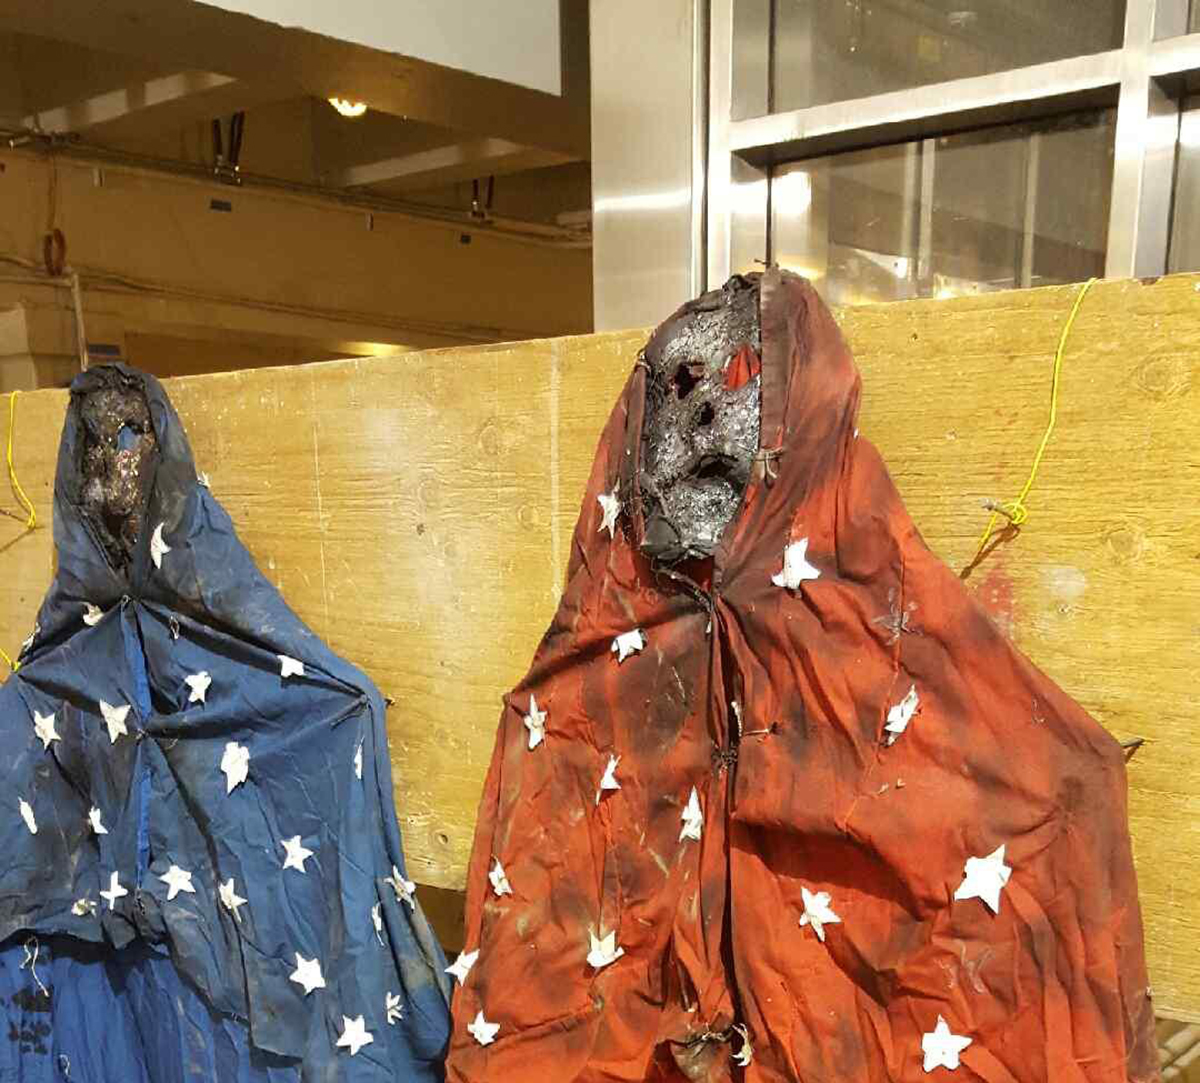 The MBTA discovered these ghoulish figures at Government Center. Photo by Joe Pesaturo via MBTA